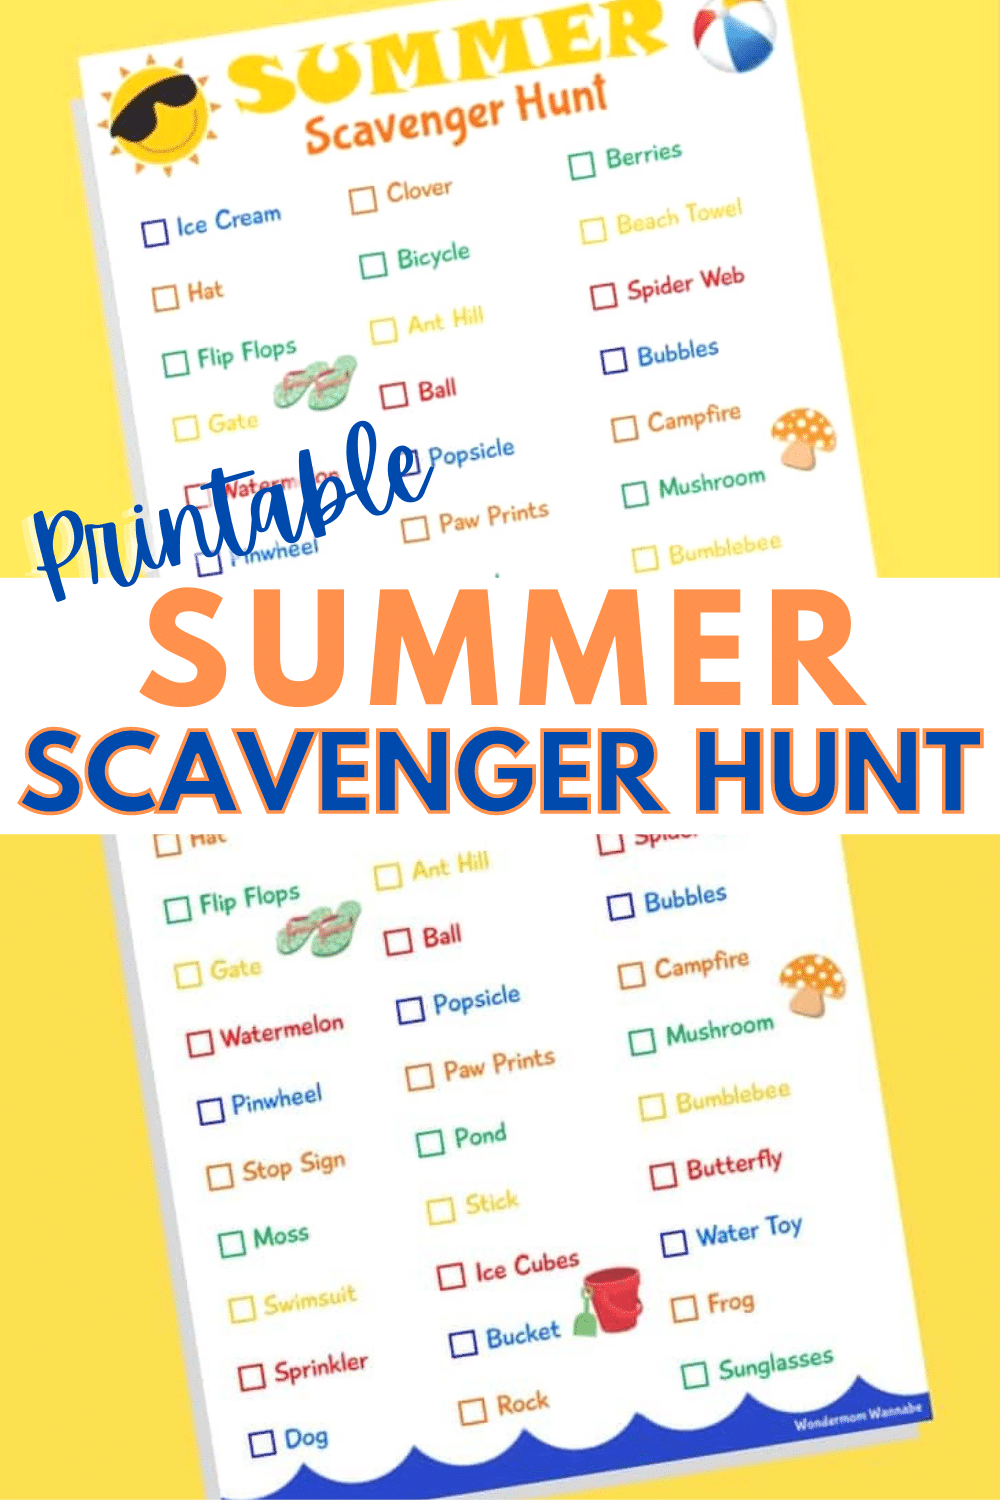 This summer scavenger hunt is the perfect way to motivate kids to get outside. Most of the items are easily found in your neighborhood. #summerfun #summeractivity #outdooractivity #scavengerhunt via @wondermomwannab